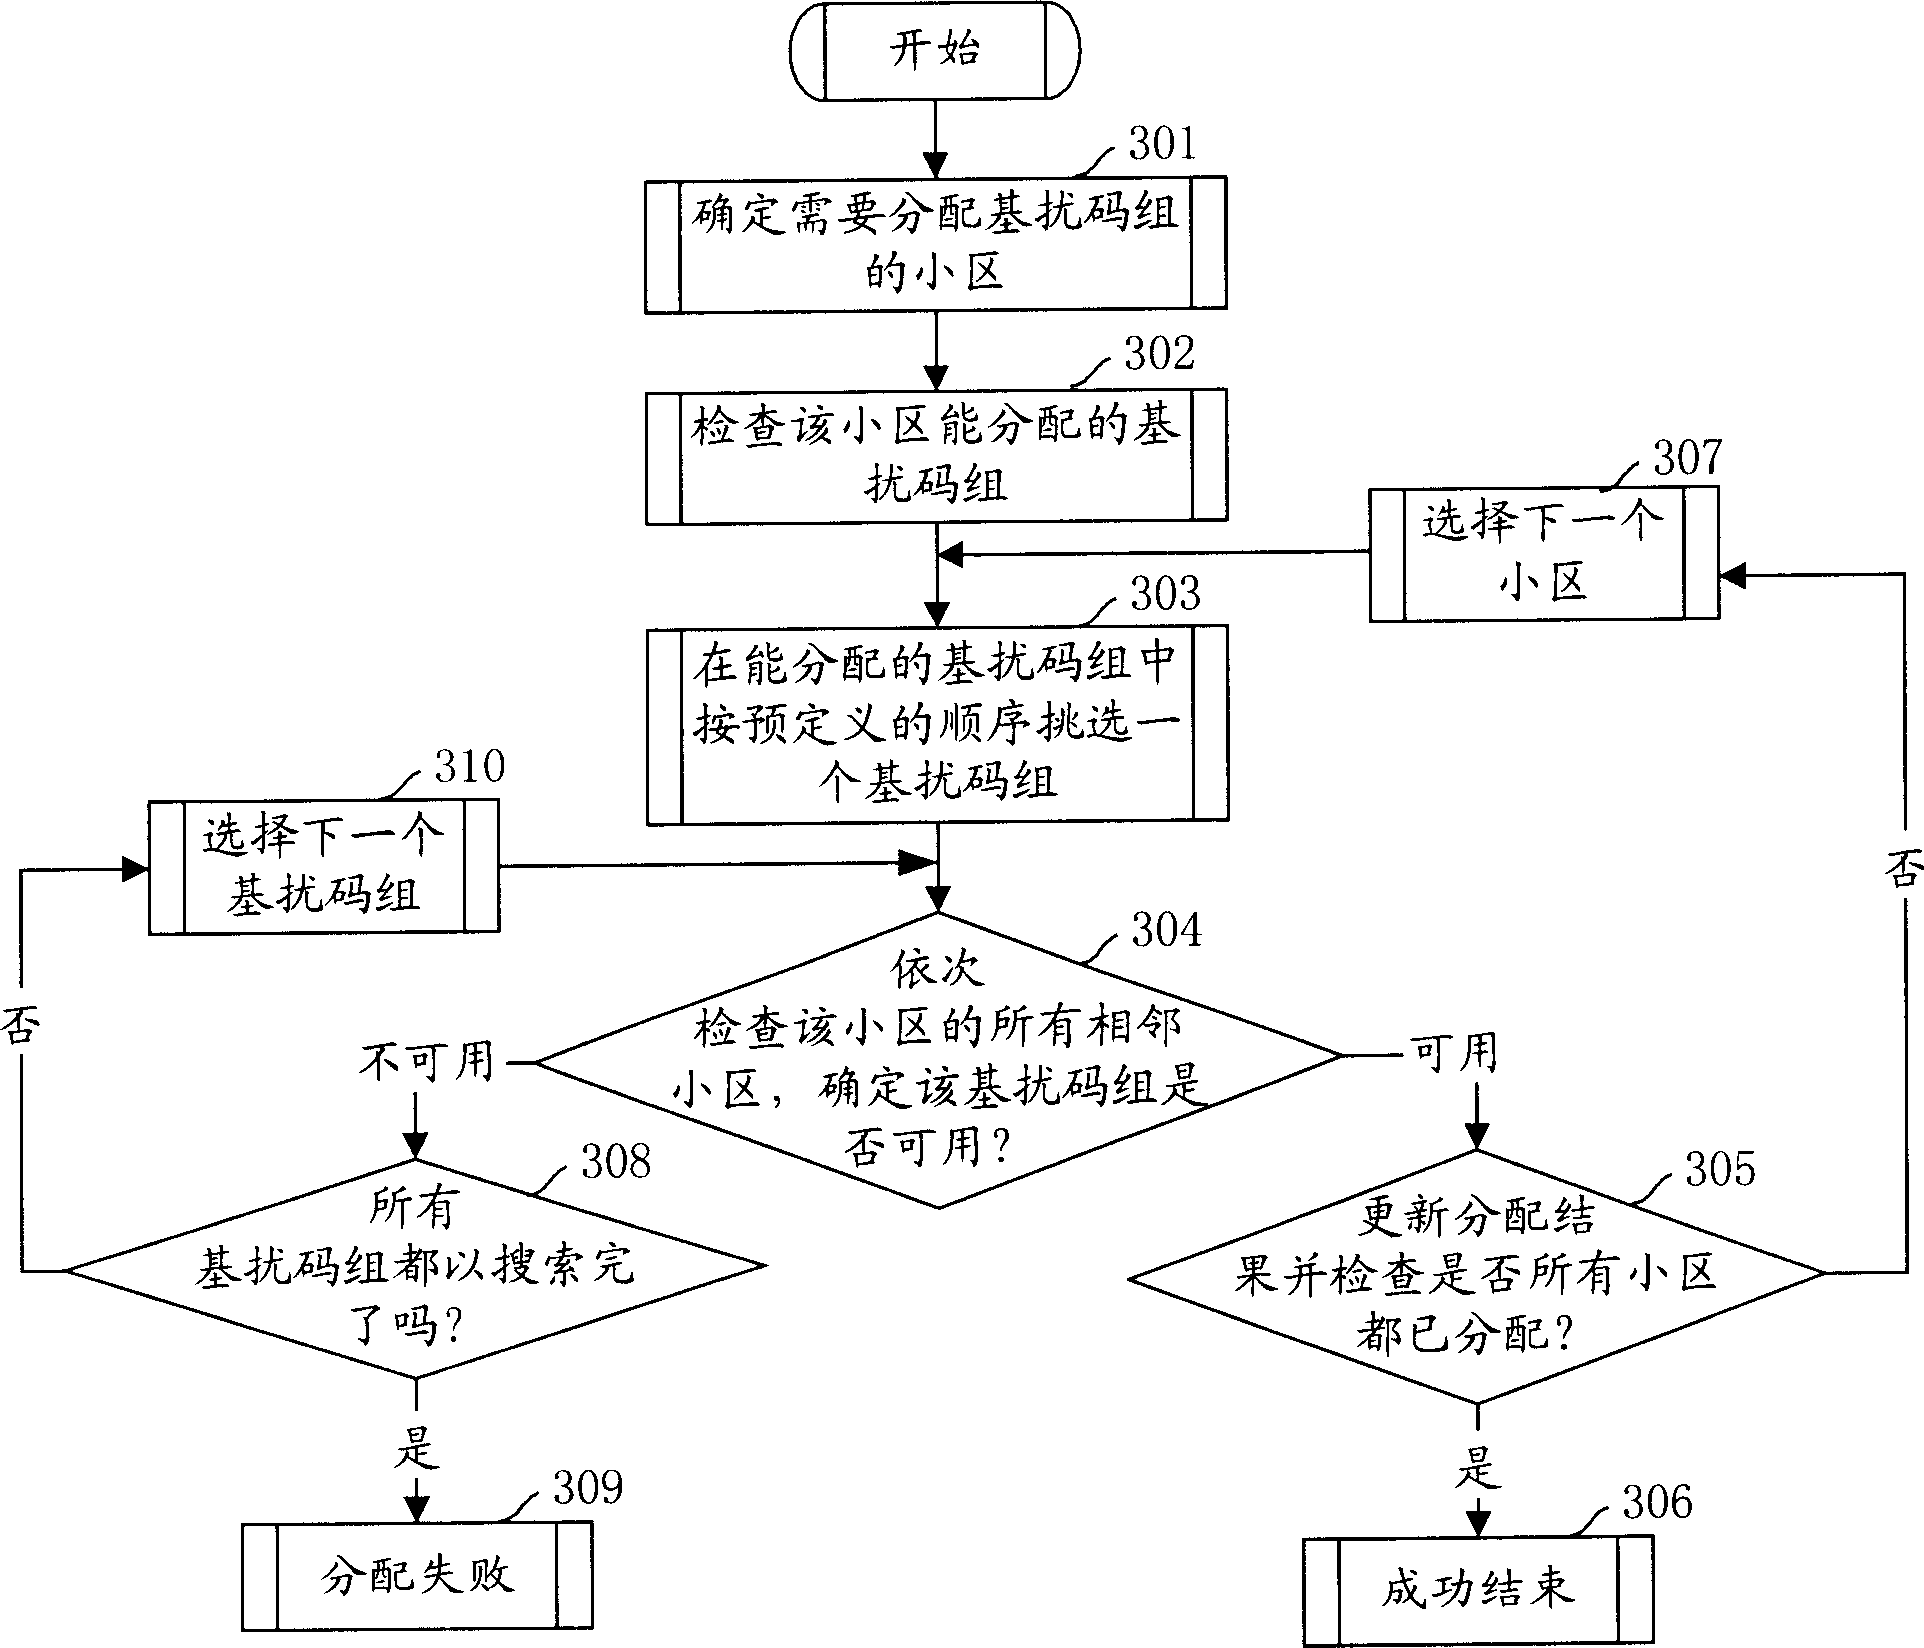 Method for reducing co-channel interference in sector interval